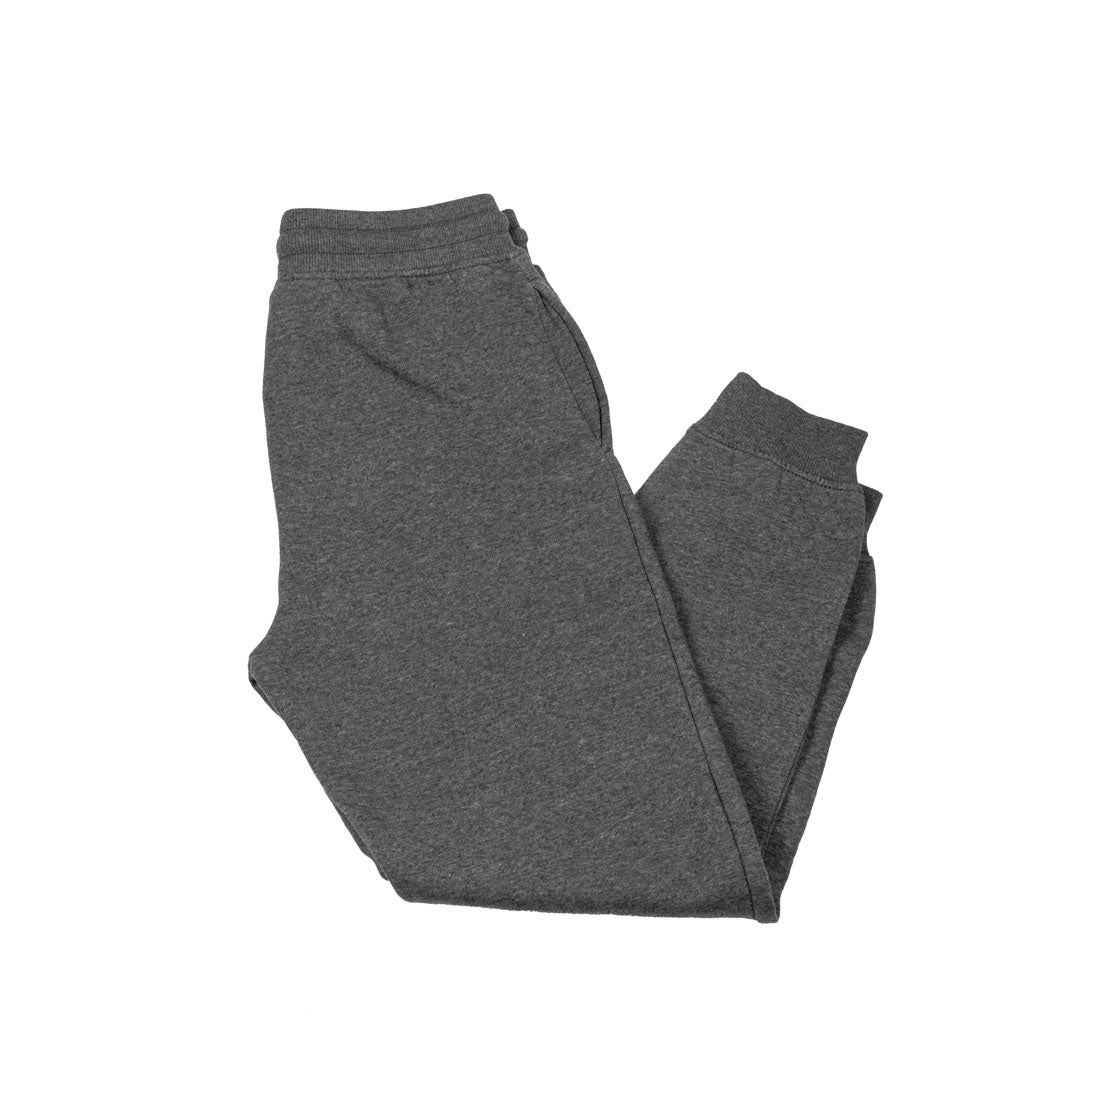 H&M Brand New Sweatpants For Girls - mymadstore.com